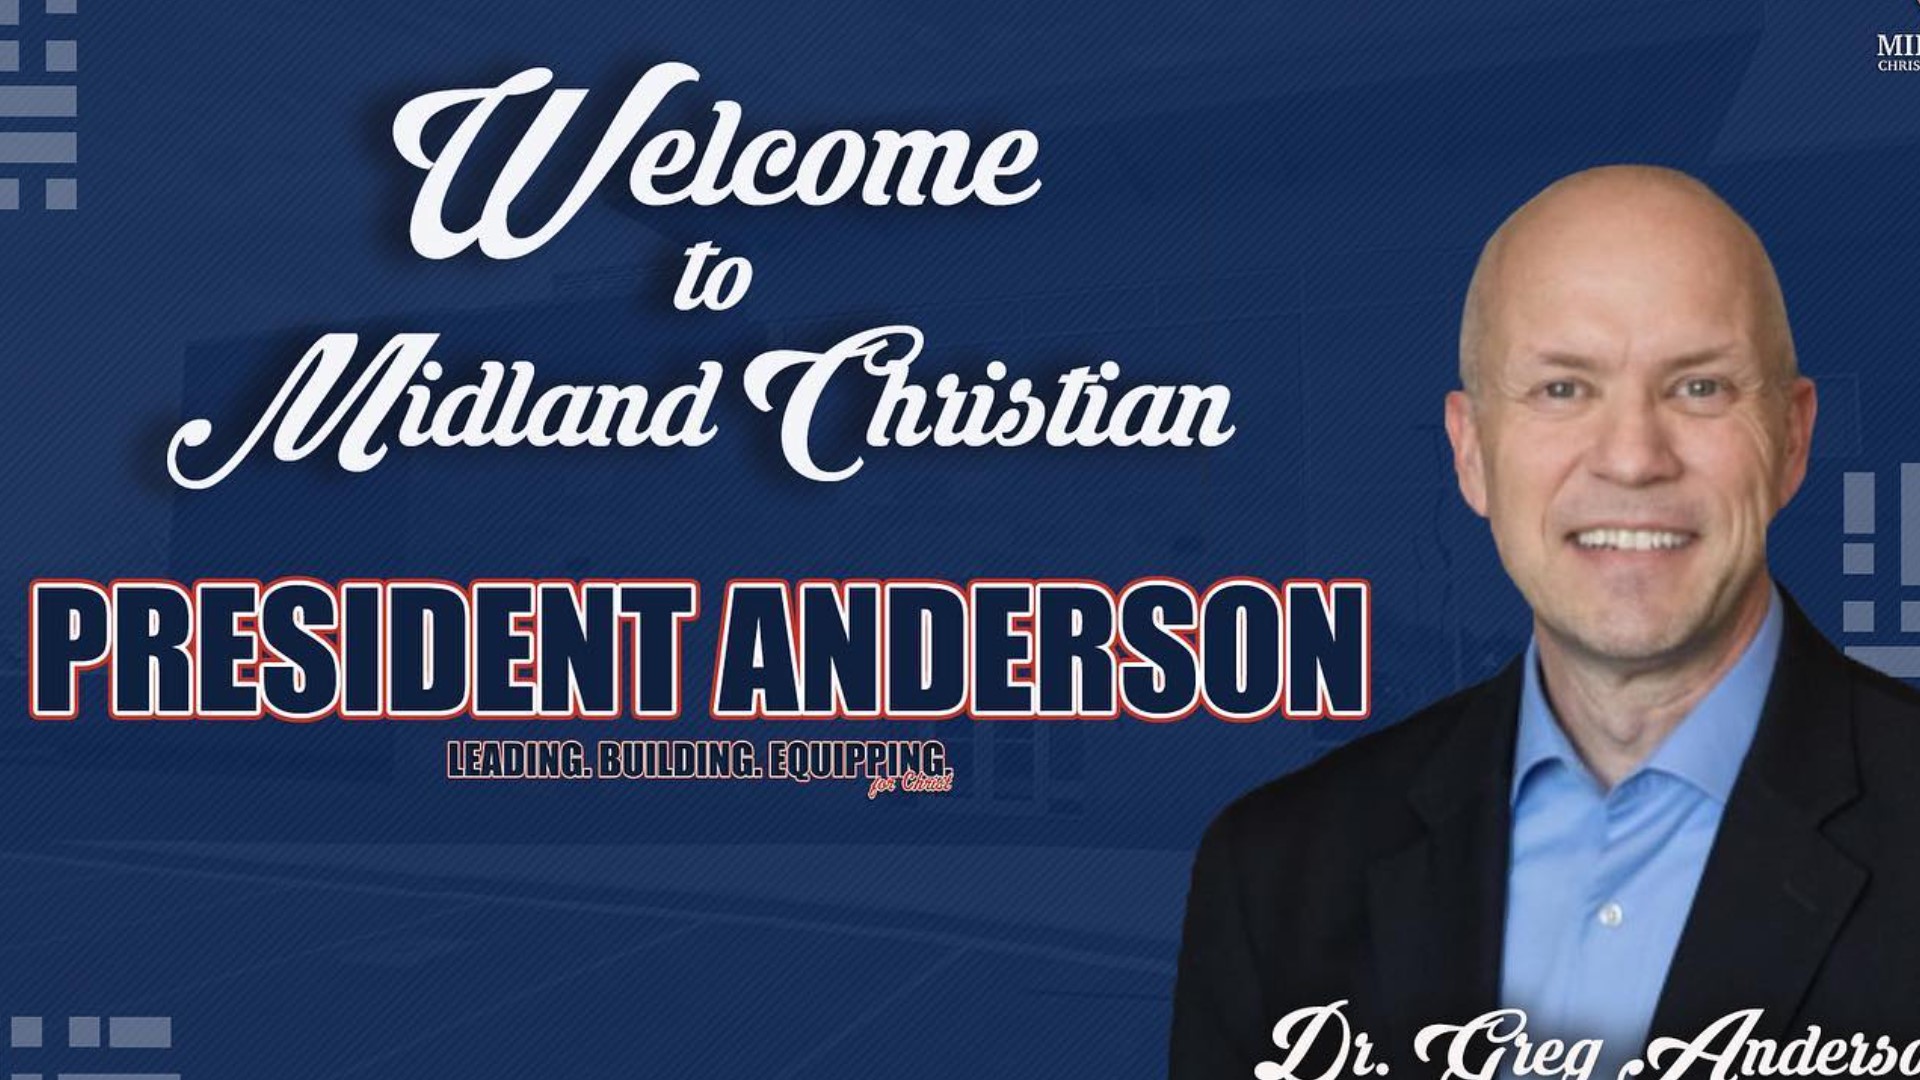 Dr. Gregory Anderson will be making his way to MCS with a background in spiritual and organizational leadership.